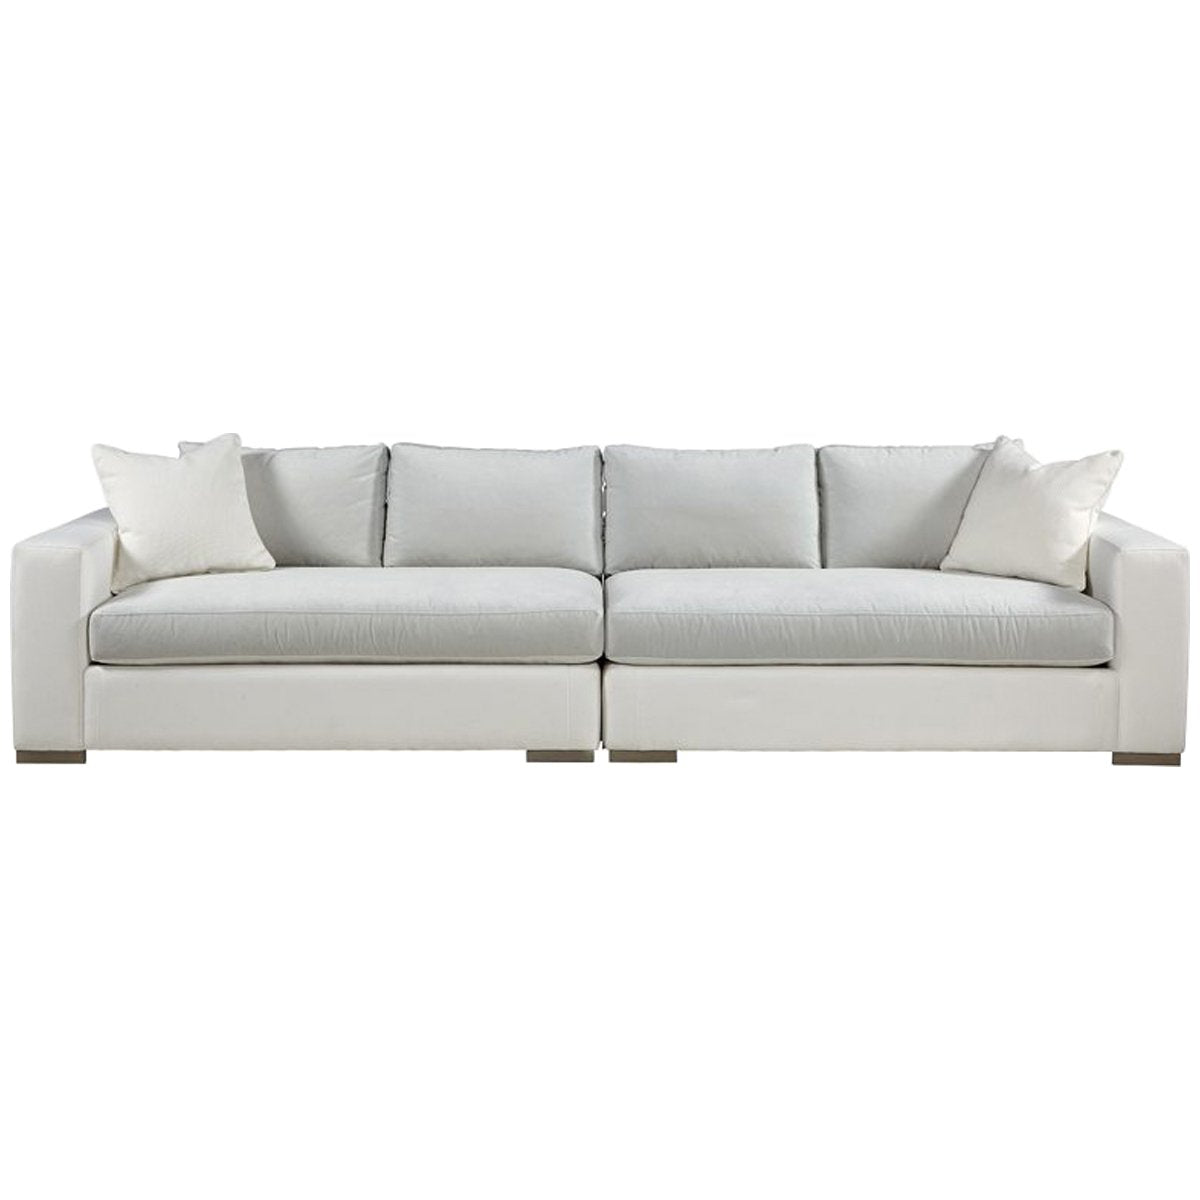 Lillian August Corso Two-Piece Sofa Sectional with Box Back